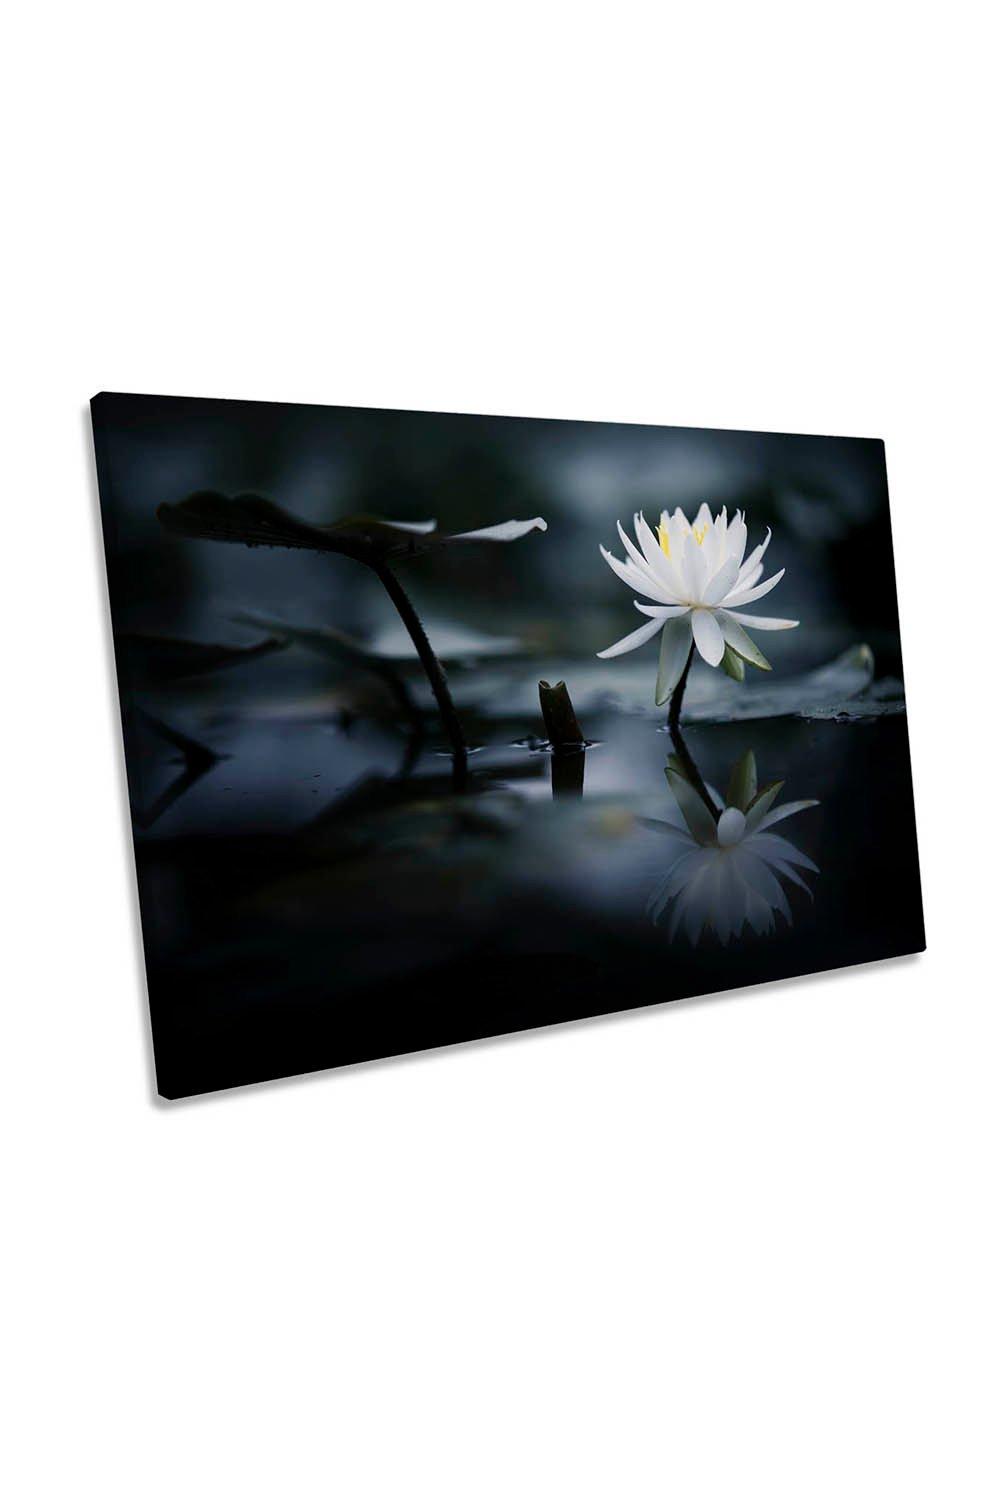 Reflection White Water Lilly Flower Canvas Wall Art Picture Print